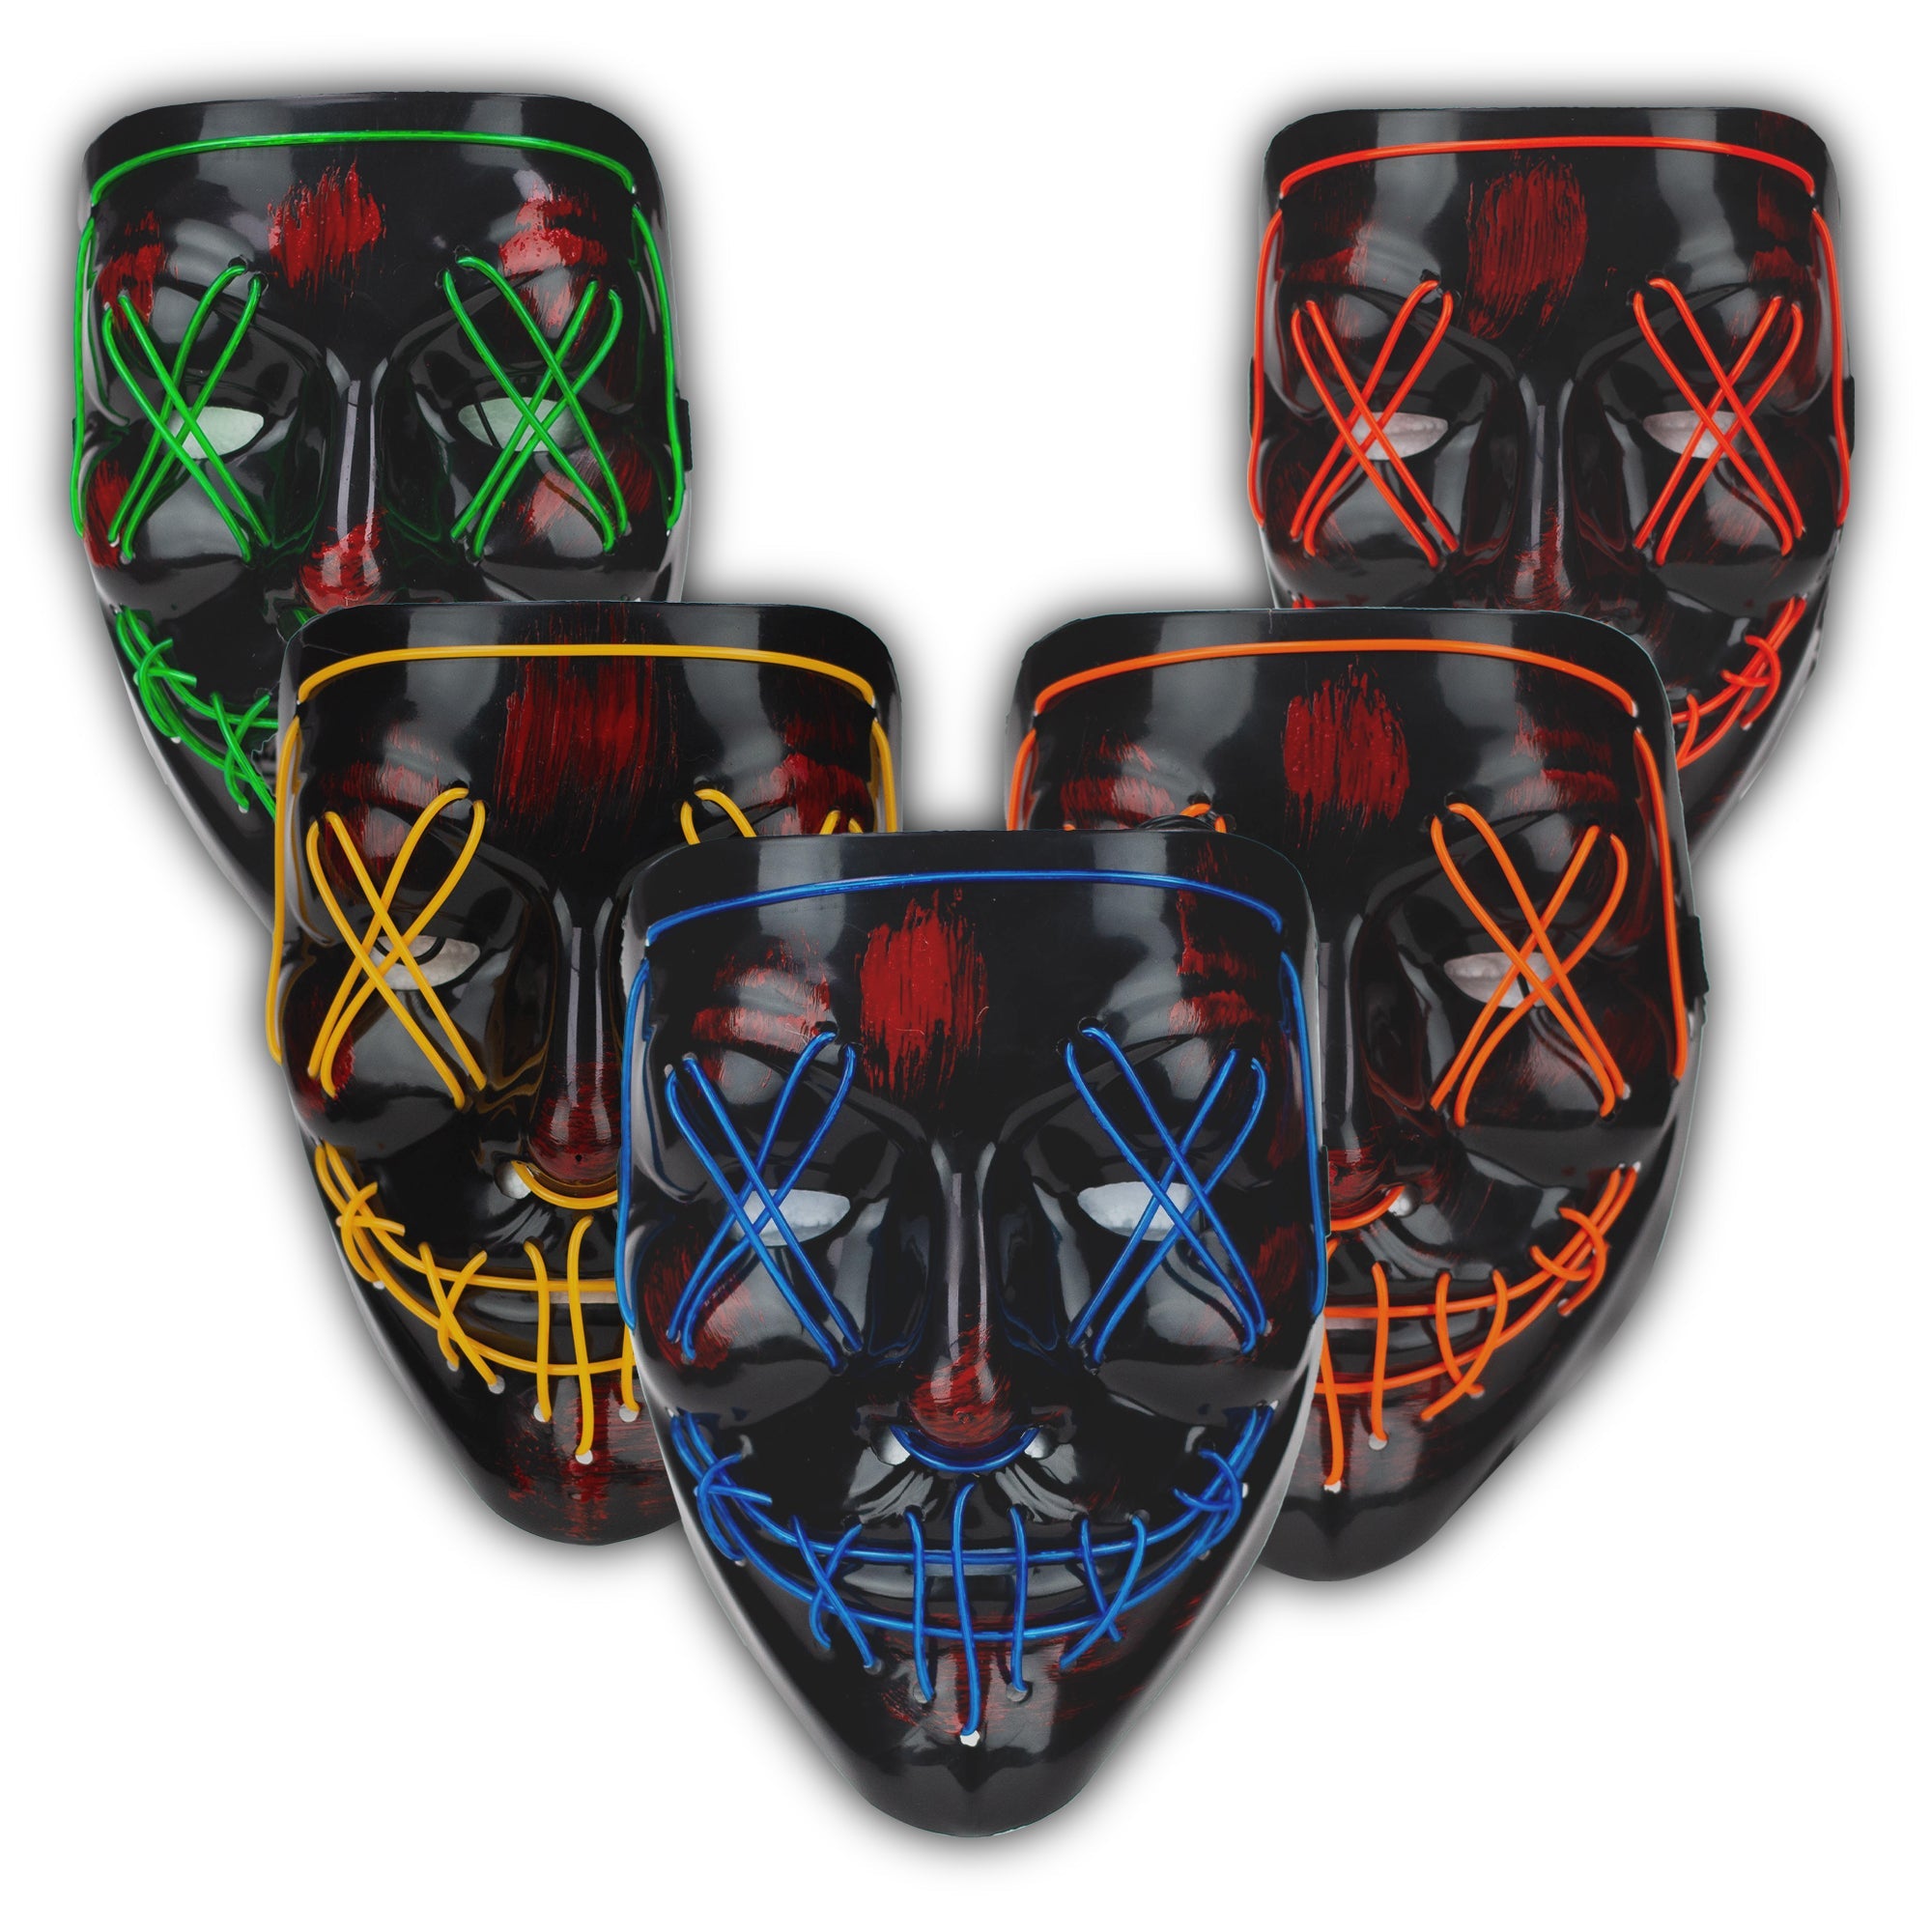 LED Neon Mask for party or Halloween Costume_6